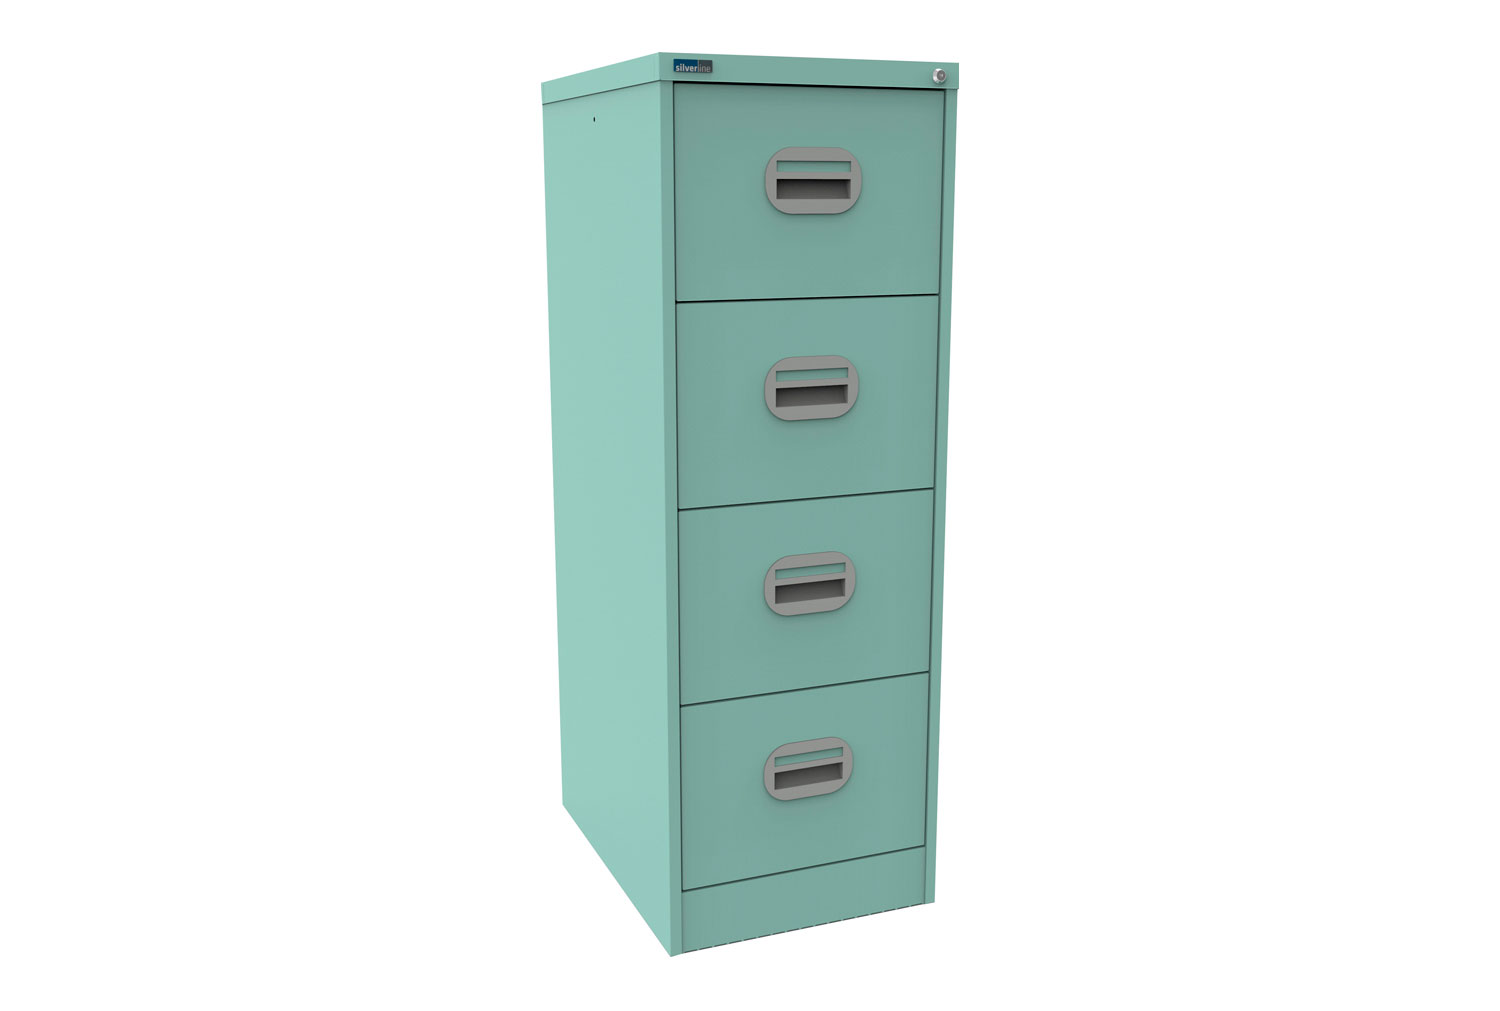 Silverline Kontrax 4 Drawer Filing Cabinet, 4 Drawer - 46wx62dx132h (cm), Peppermint Green